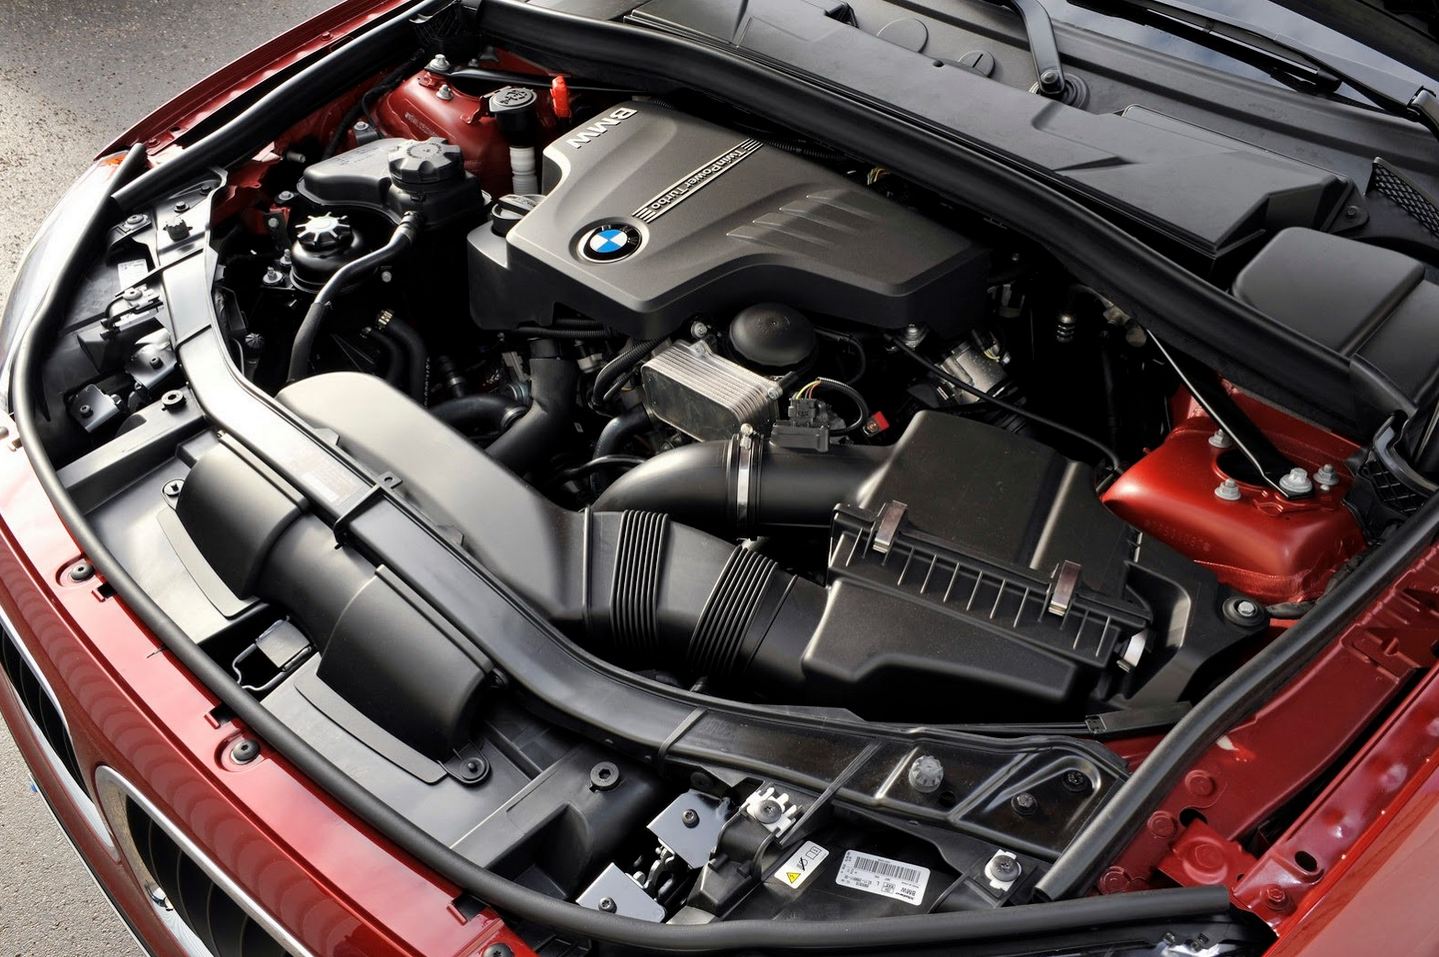 BMW recalls more than 176,000 N20 and N26 engines